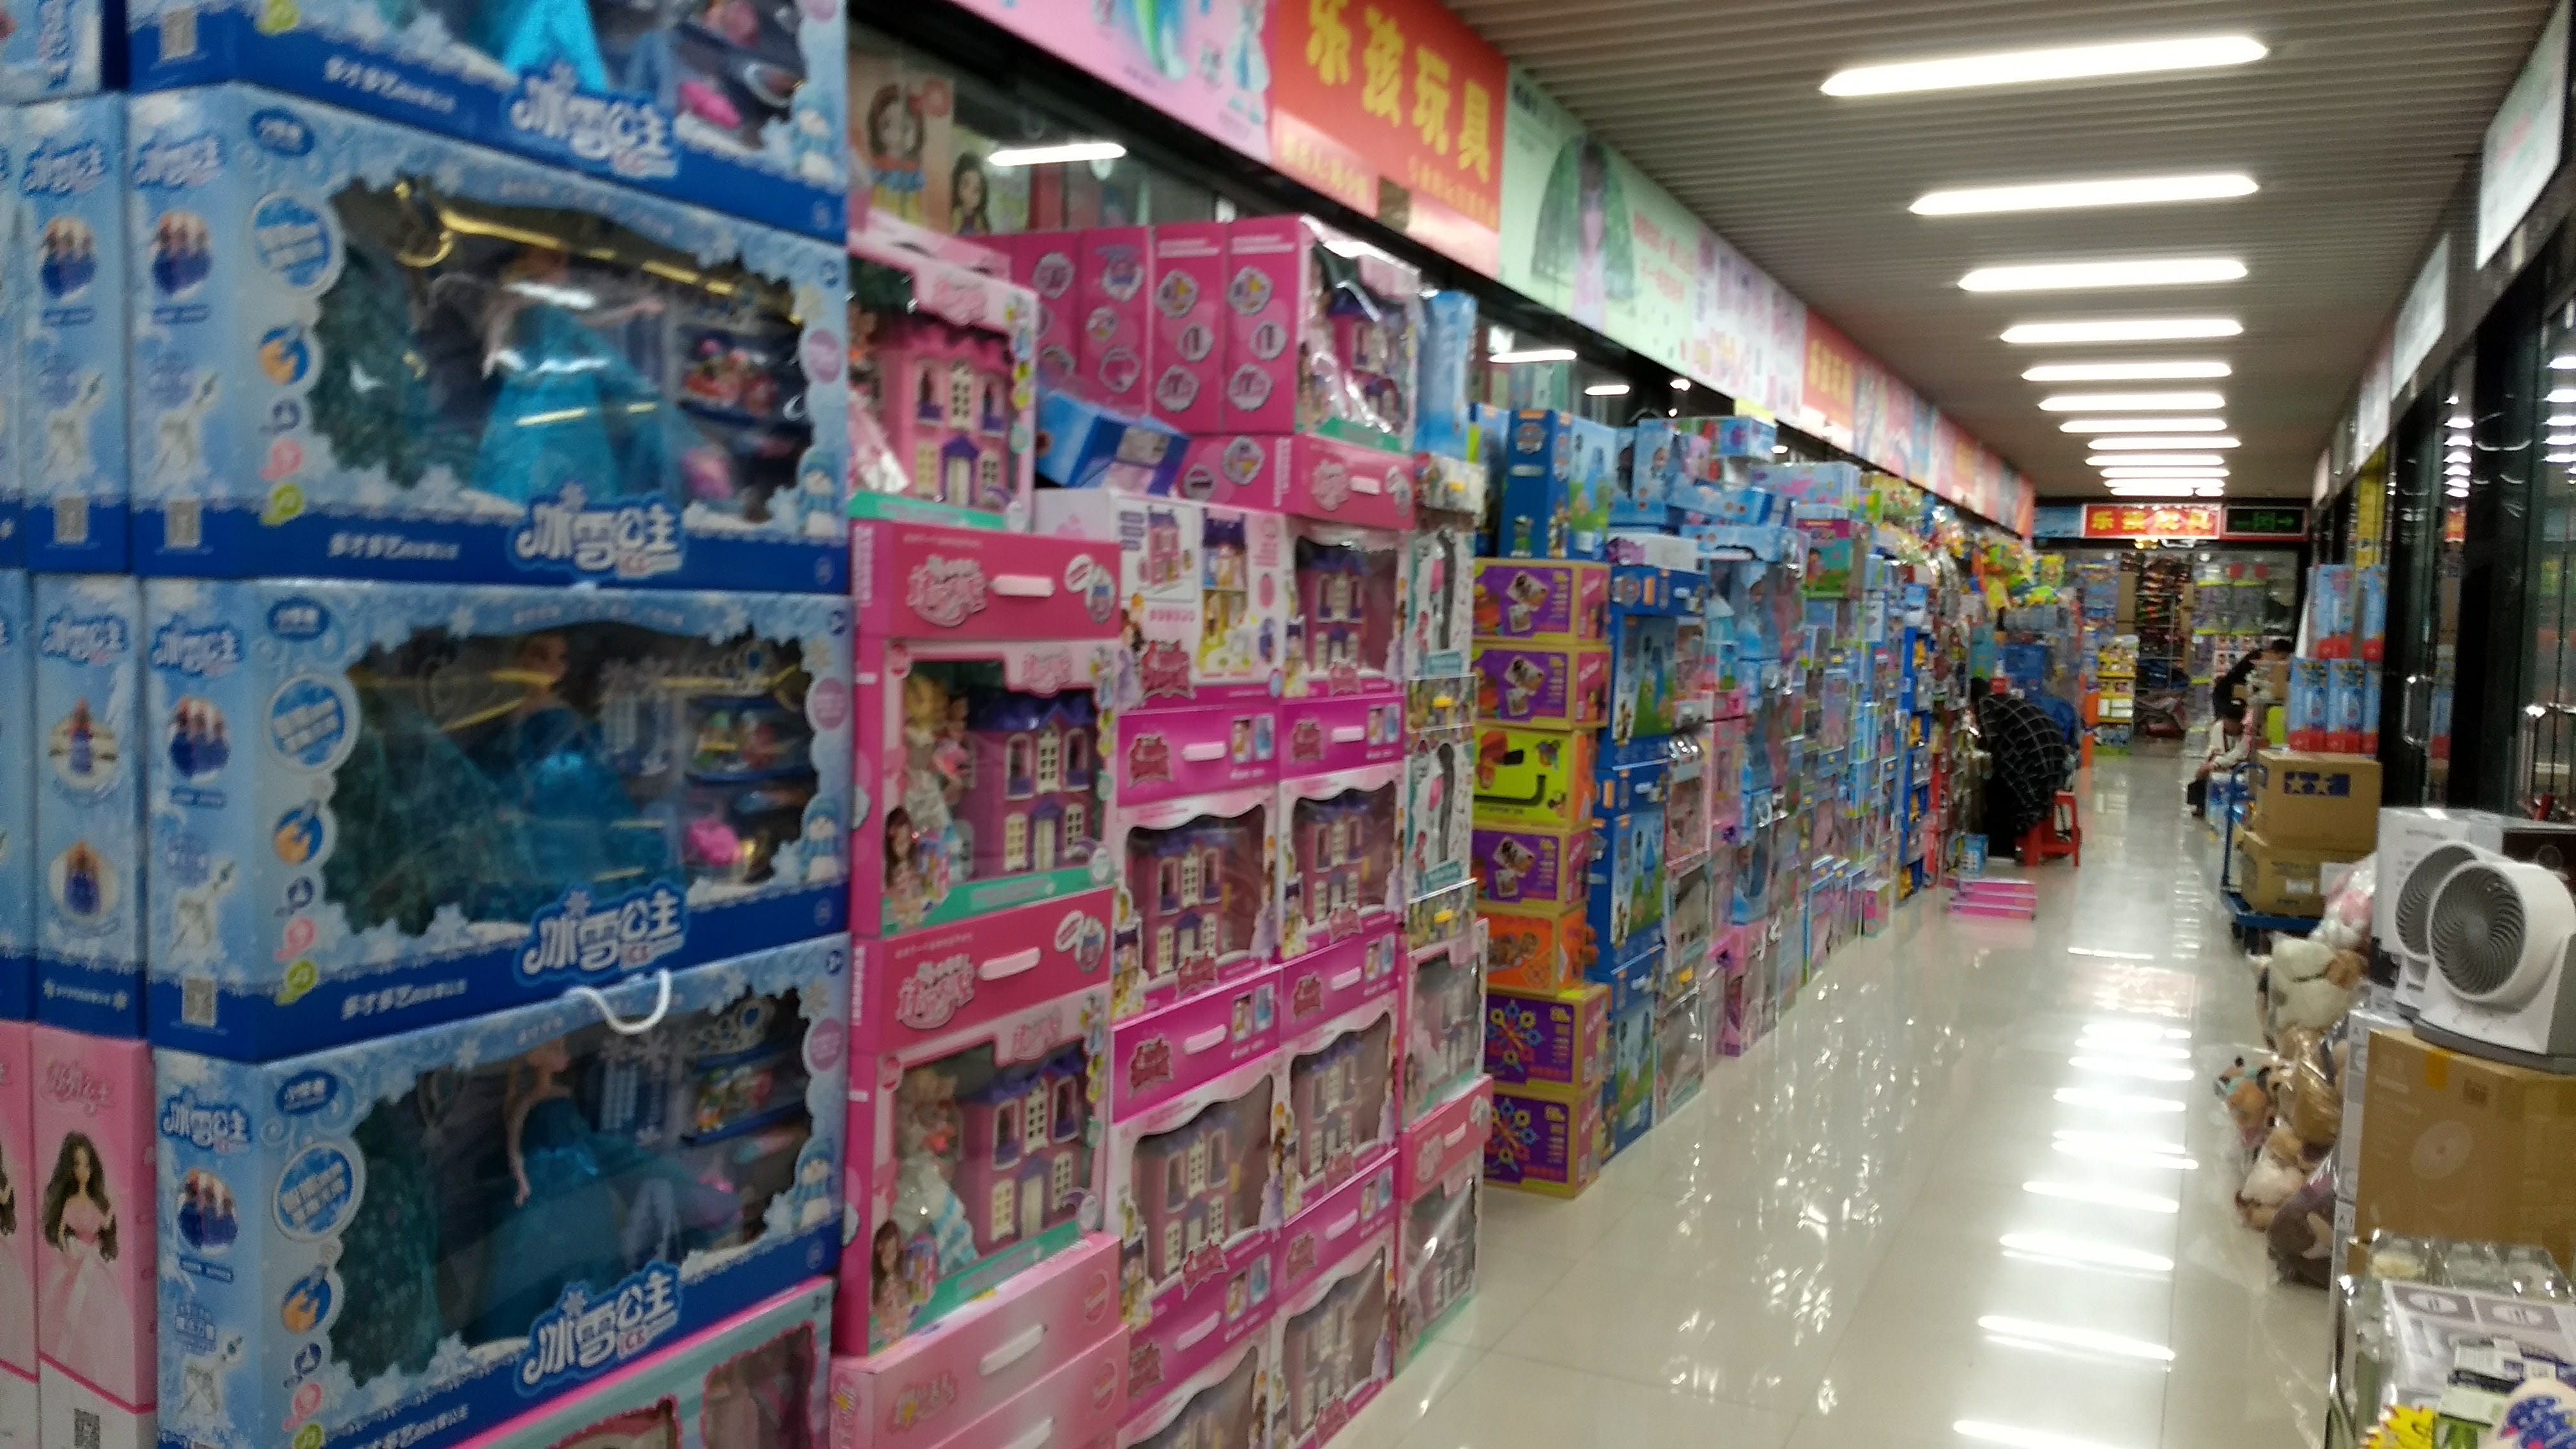 wholesale market for toys